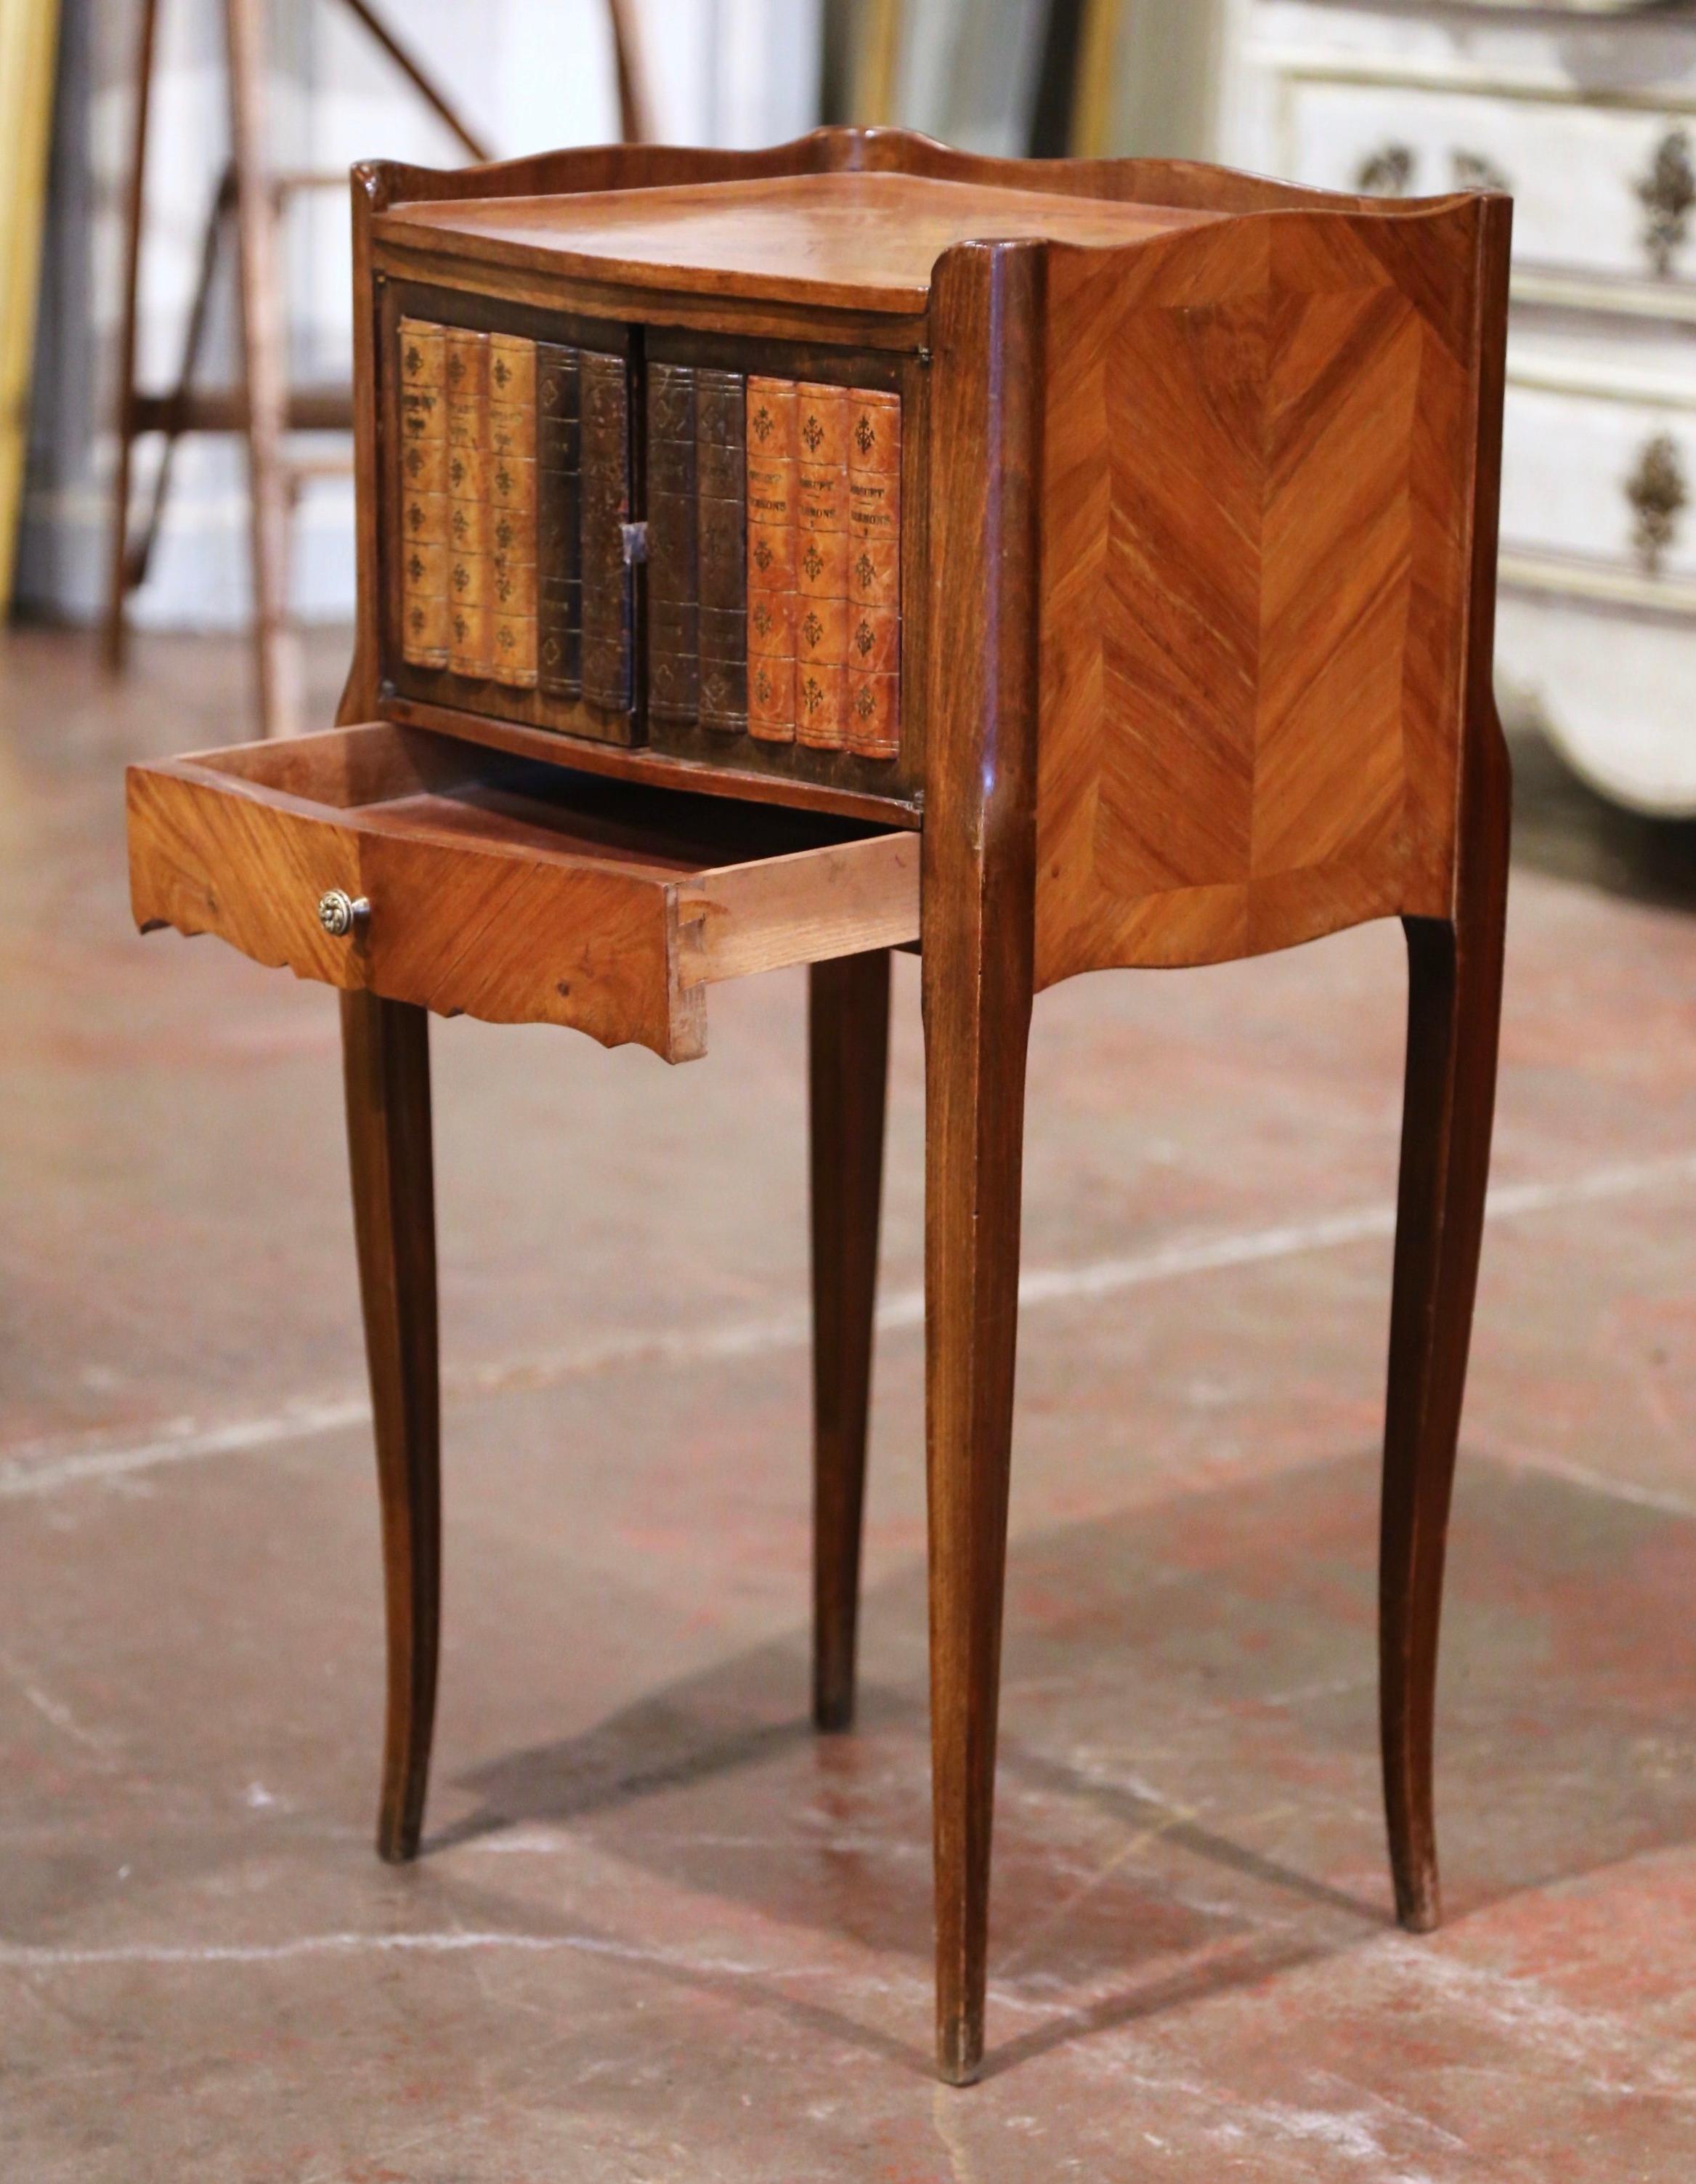 19th Century French Marquetry Walnut Nightstand with 